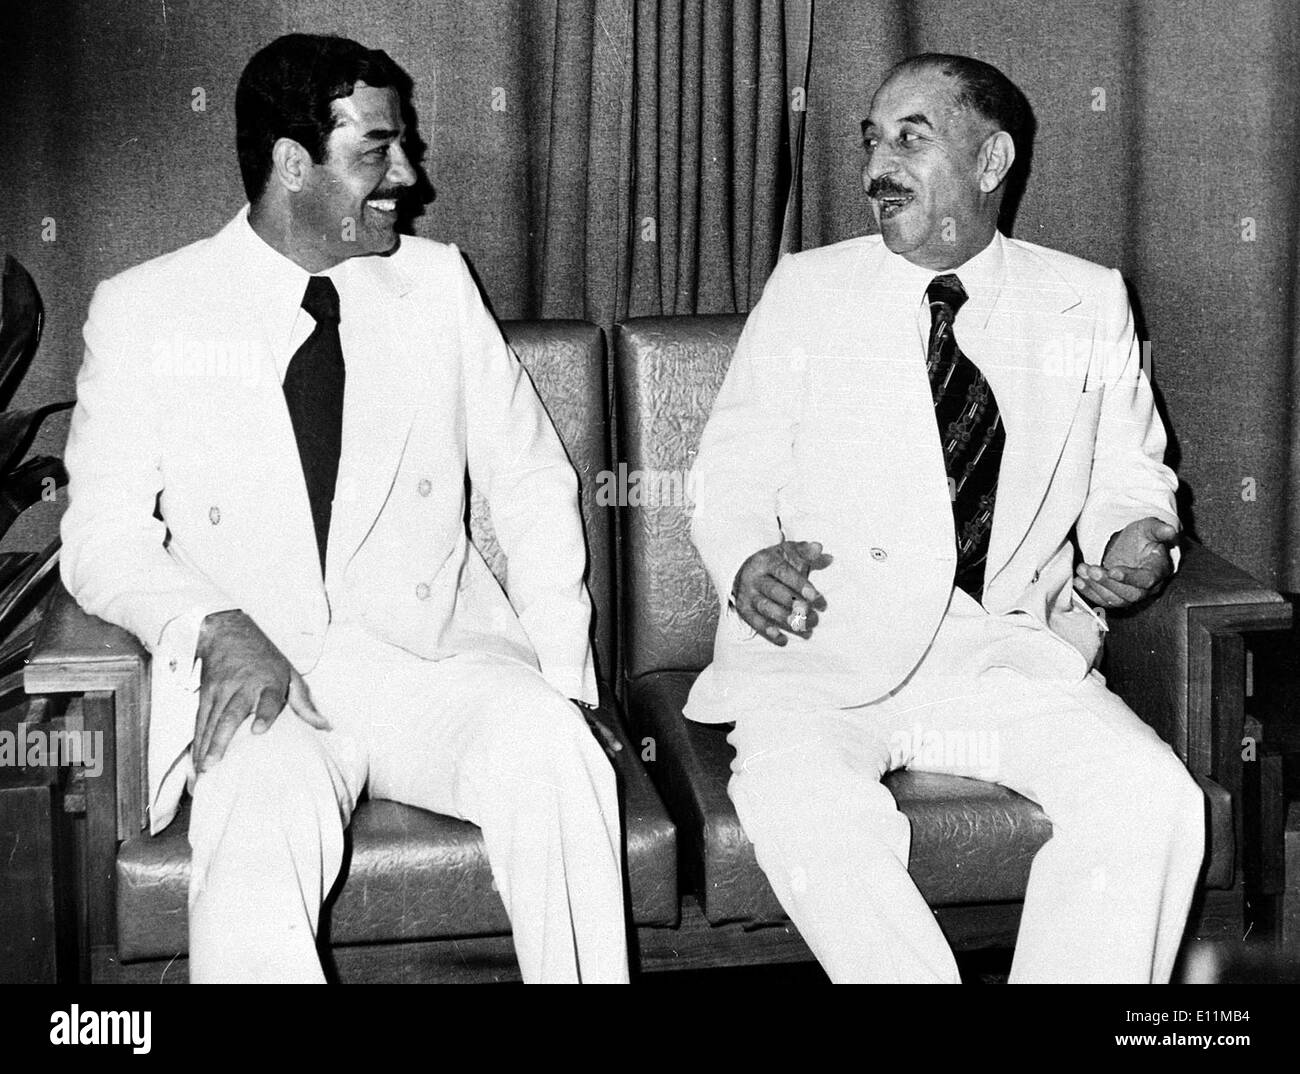 Iraqi Dictator SADDAM HUSSEIN then VP with then Iraqi President Ahmed Hassan al-Bakr, his cousin, a year before he overthrew him Stock Photo